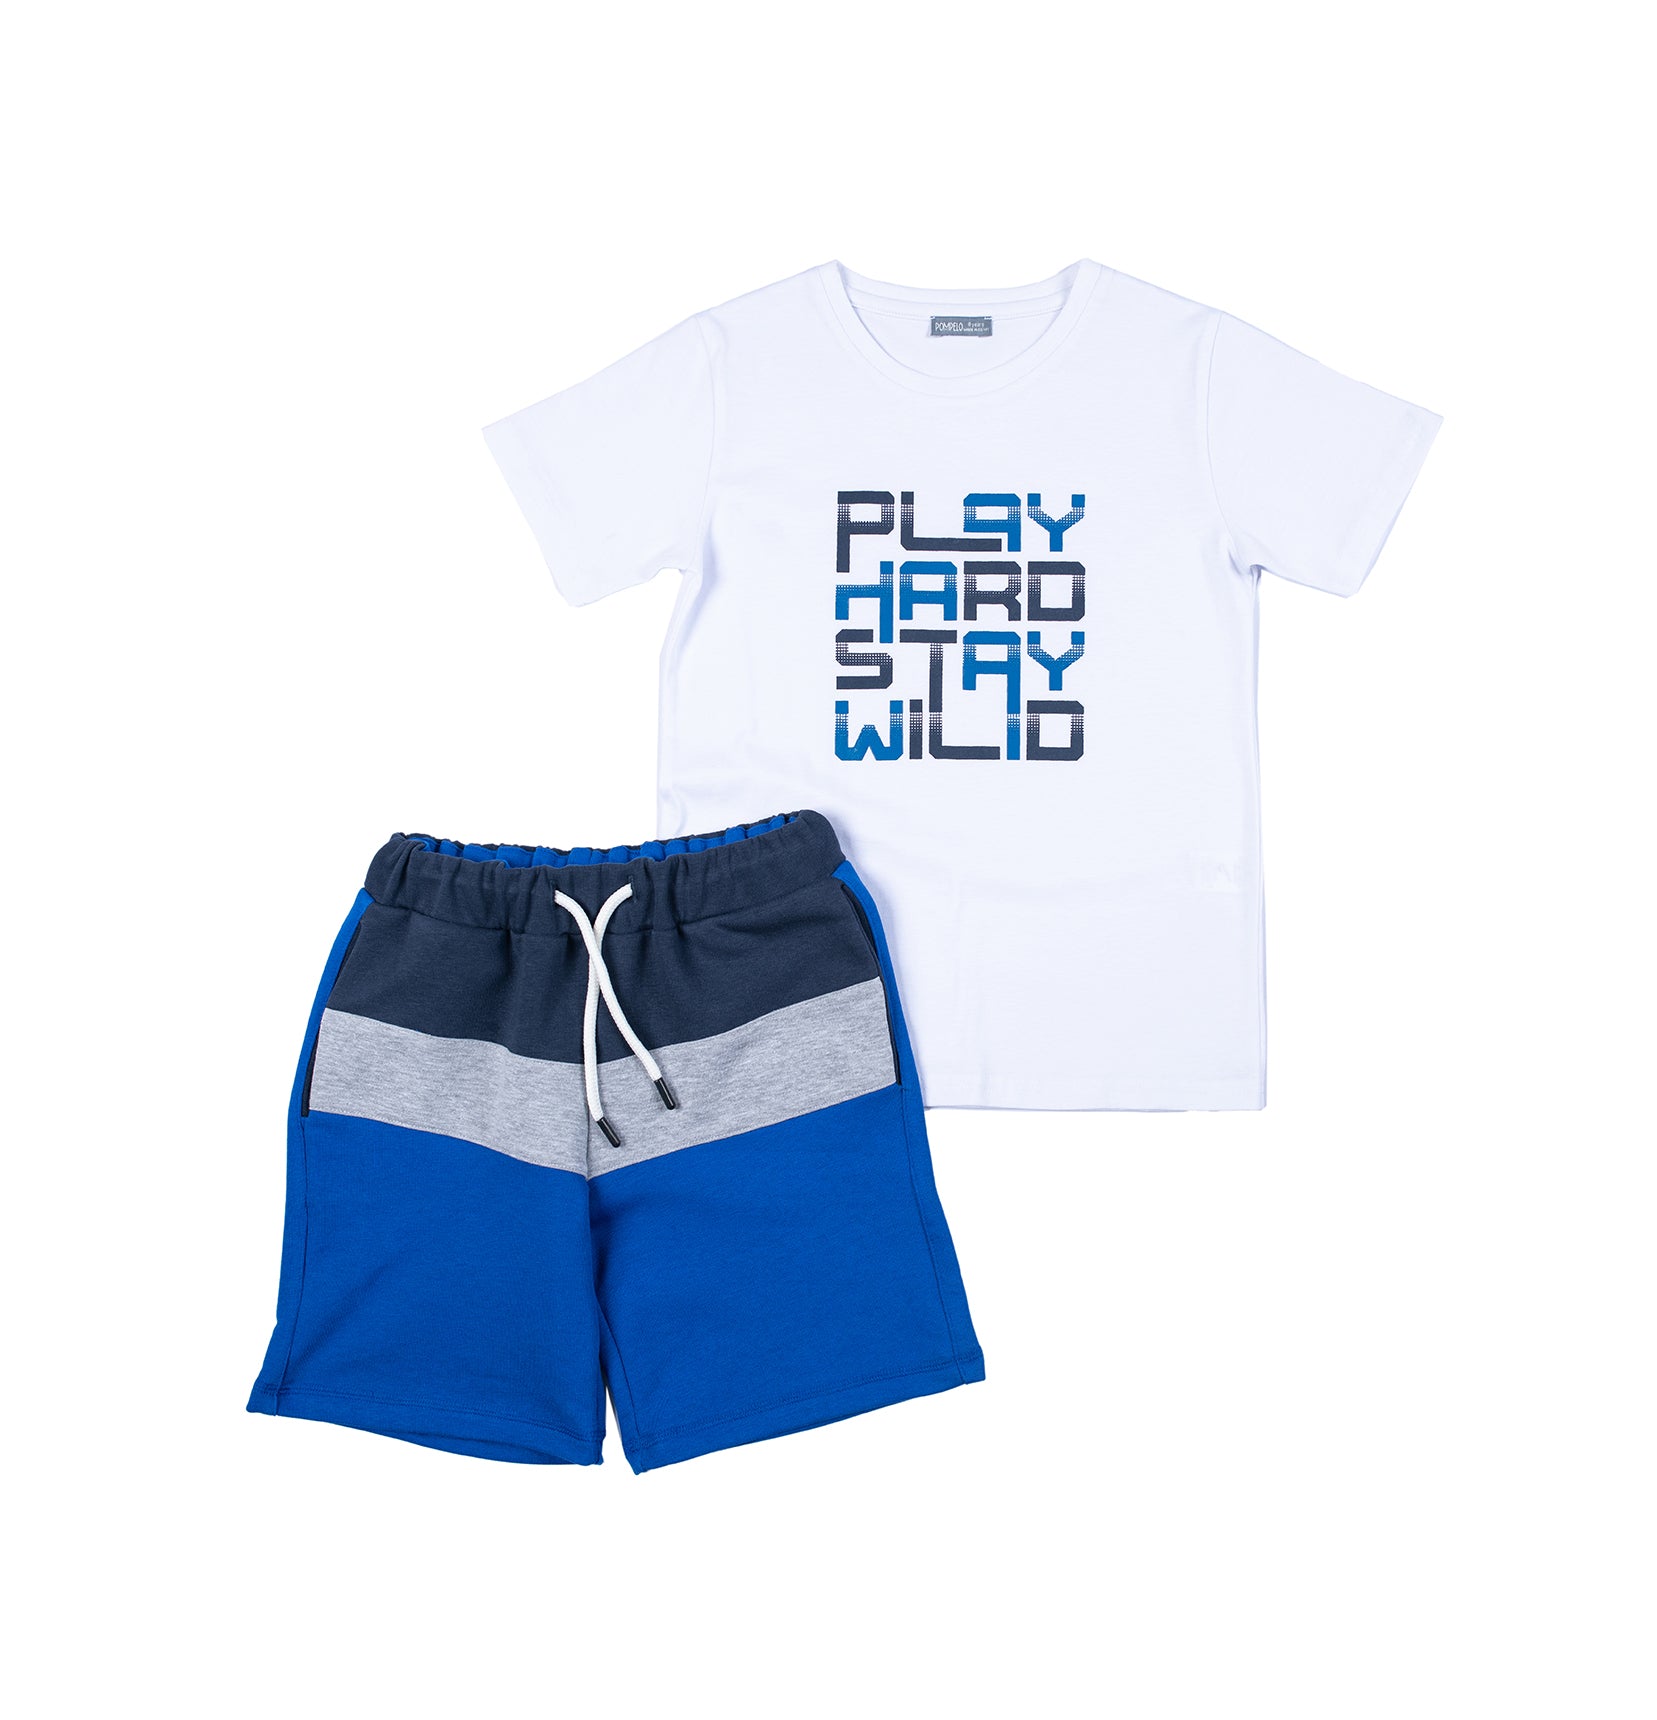 Boy summer pajamas set of top and shorts by Pompelo